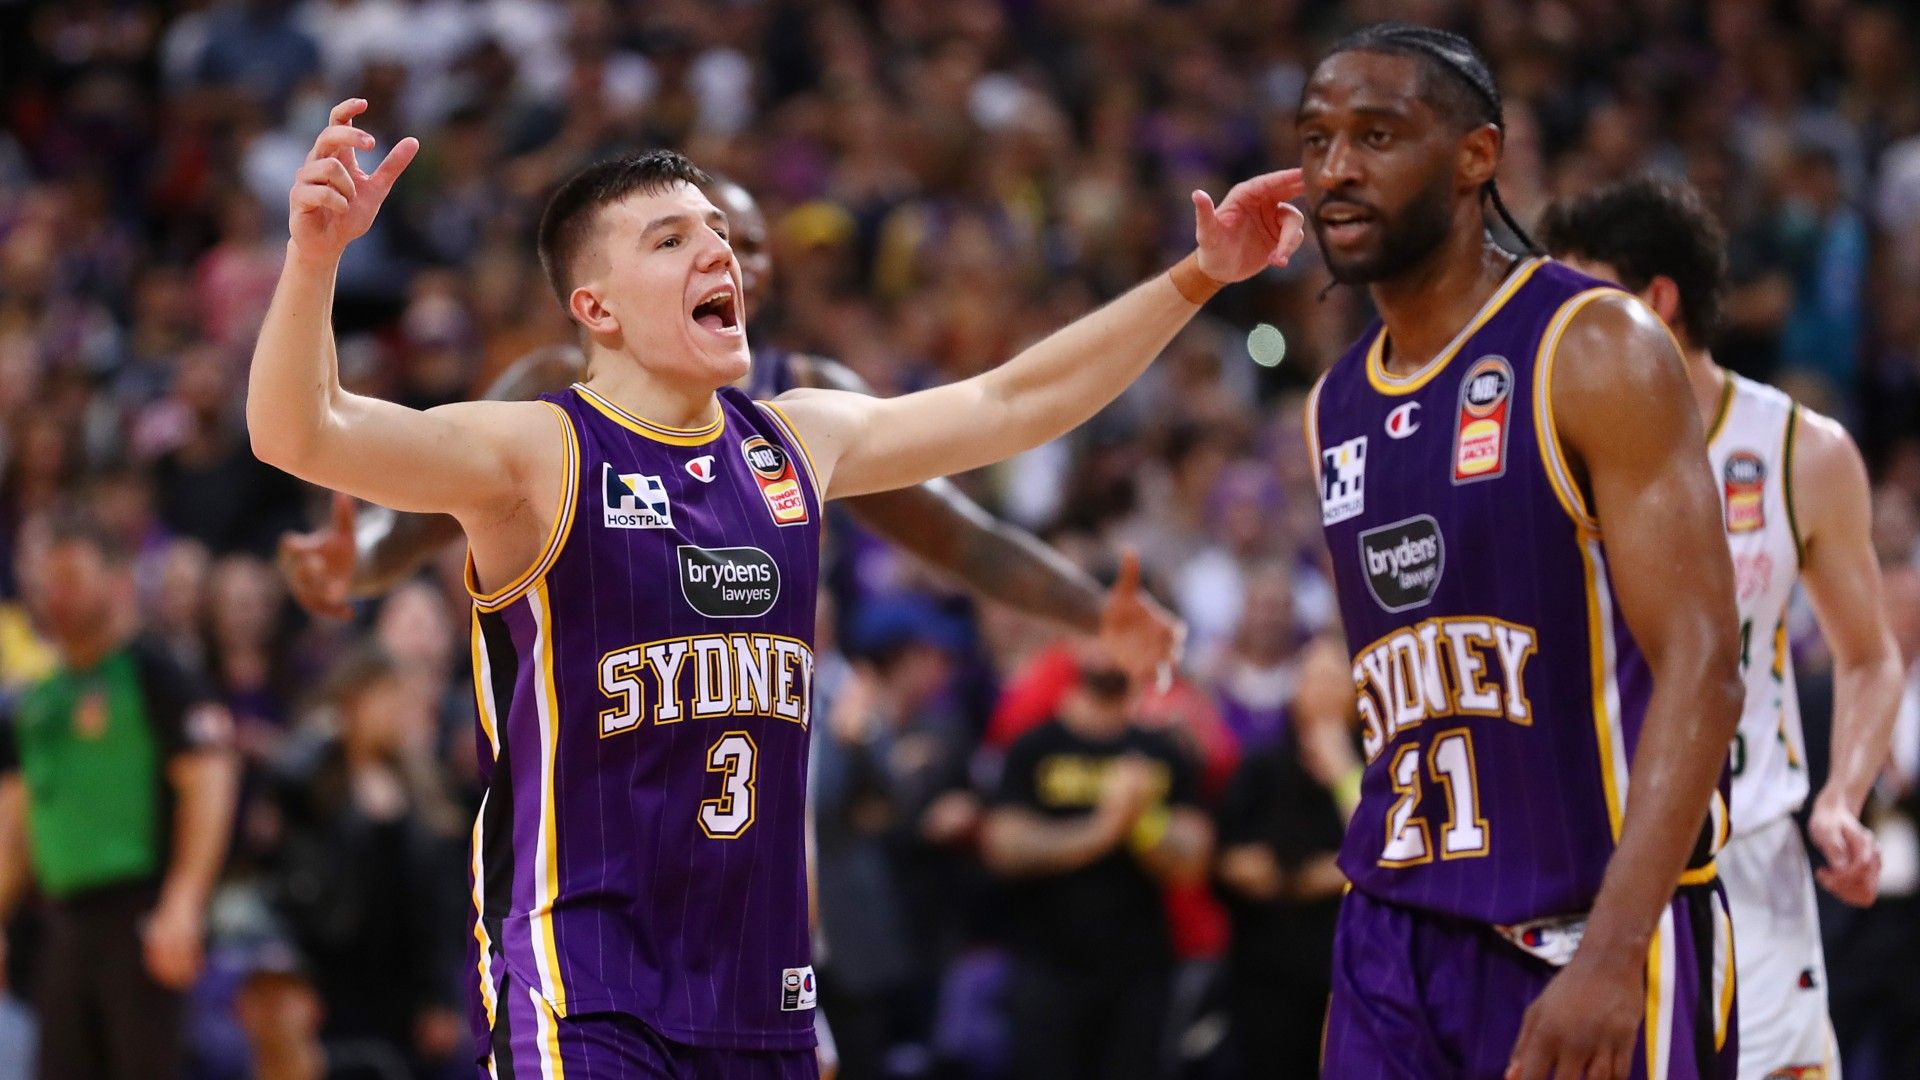 Sydney Kings boss forced to immediately defend Christmas Day game against Melbourne United